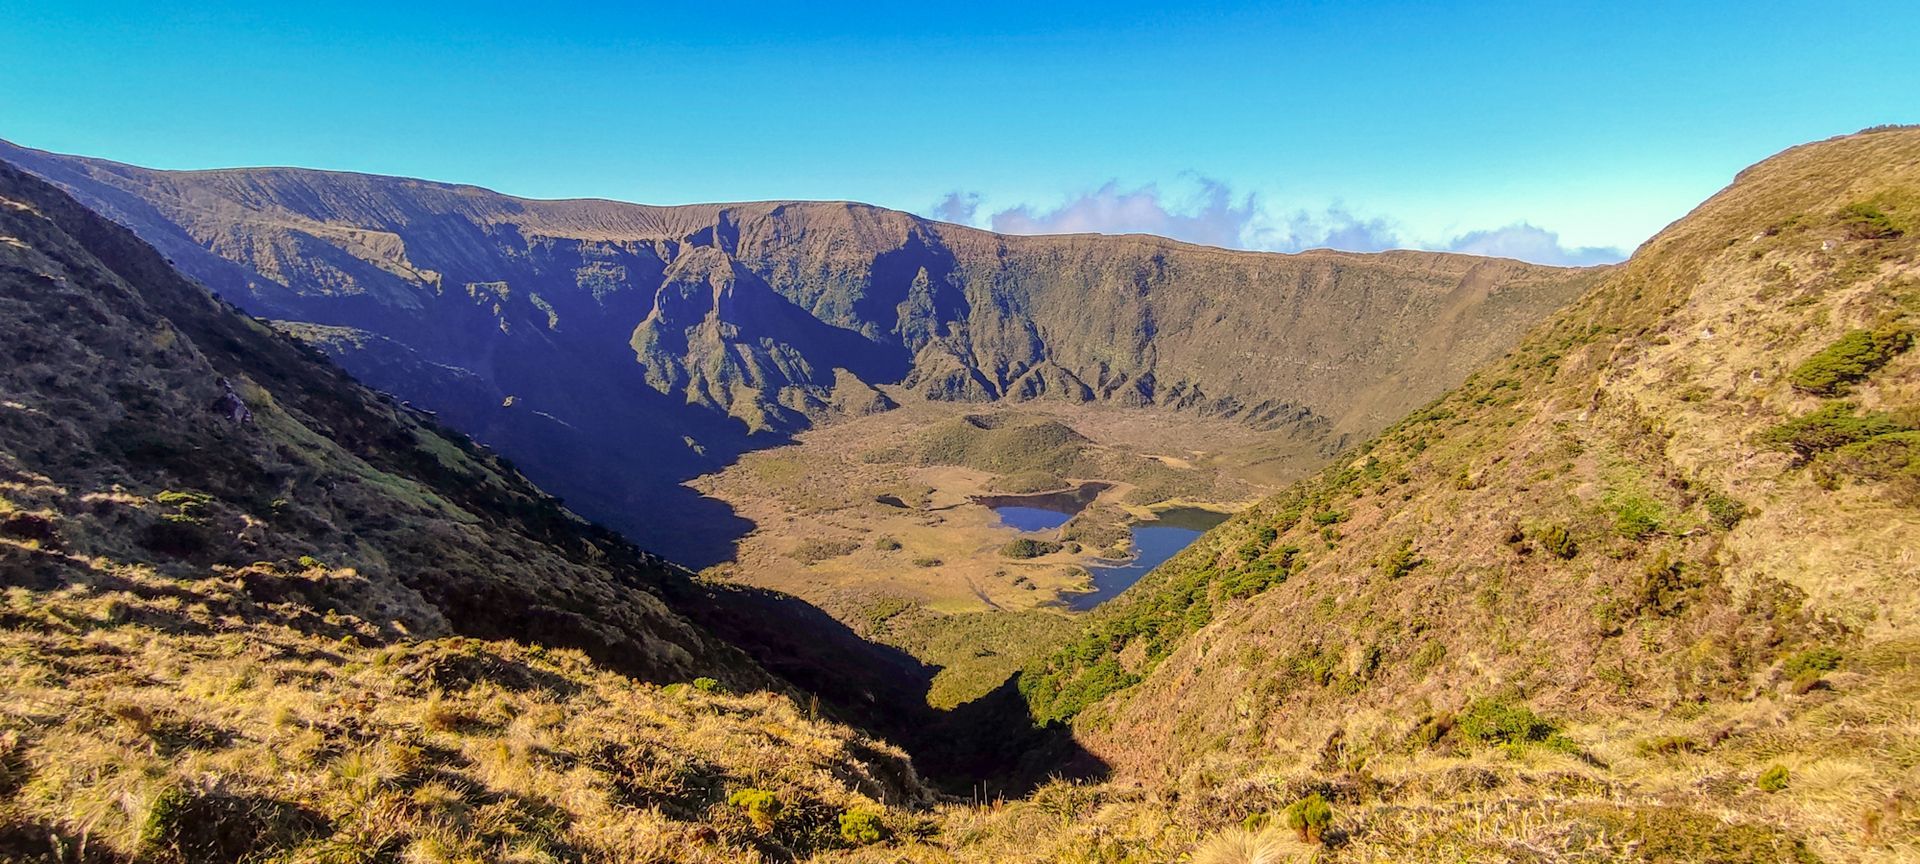 Visit the Caldeira do Faial on our full-day Excursions, Tours and Guided Visits on the island of Faial Azores.